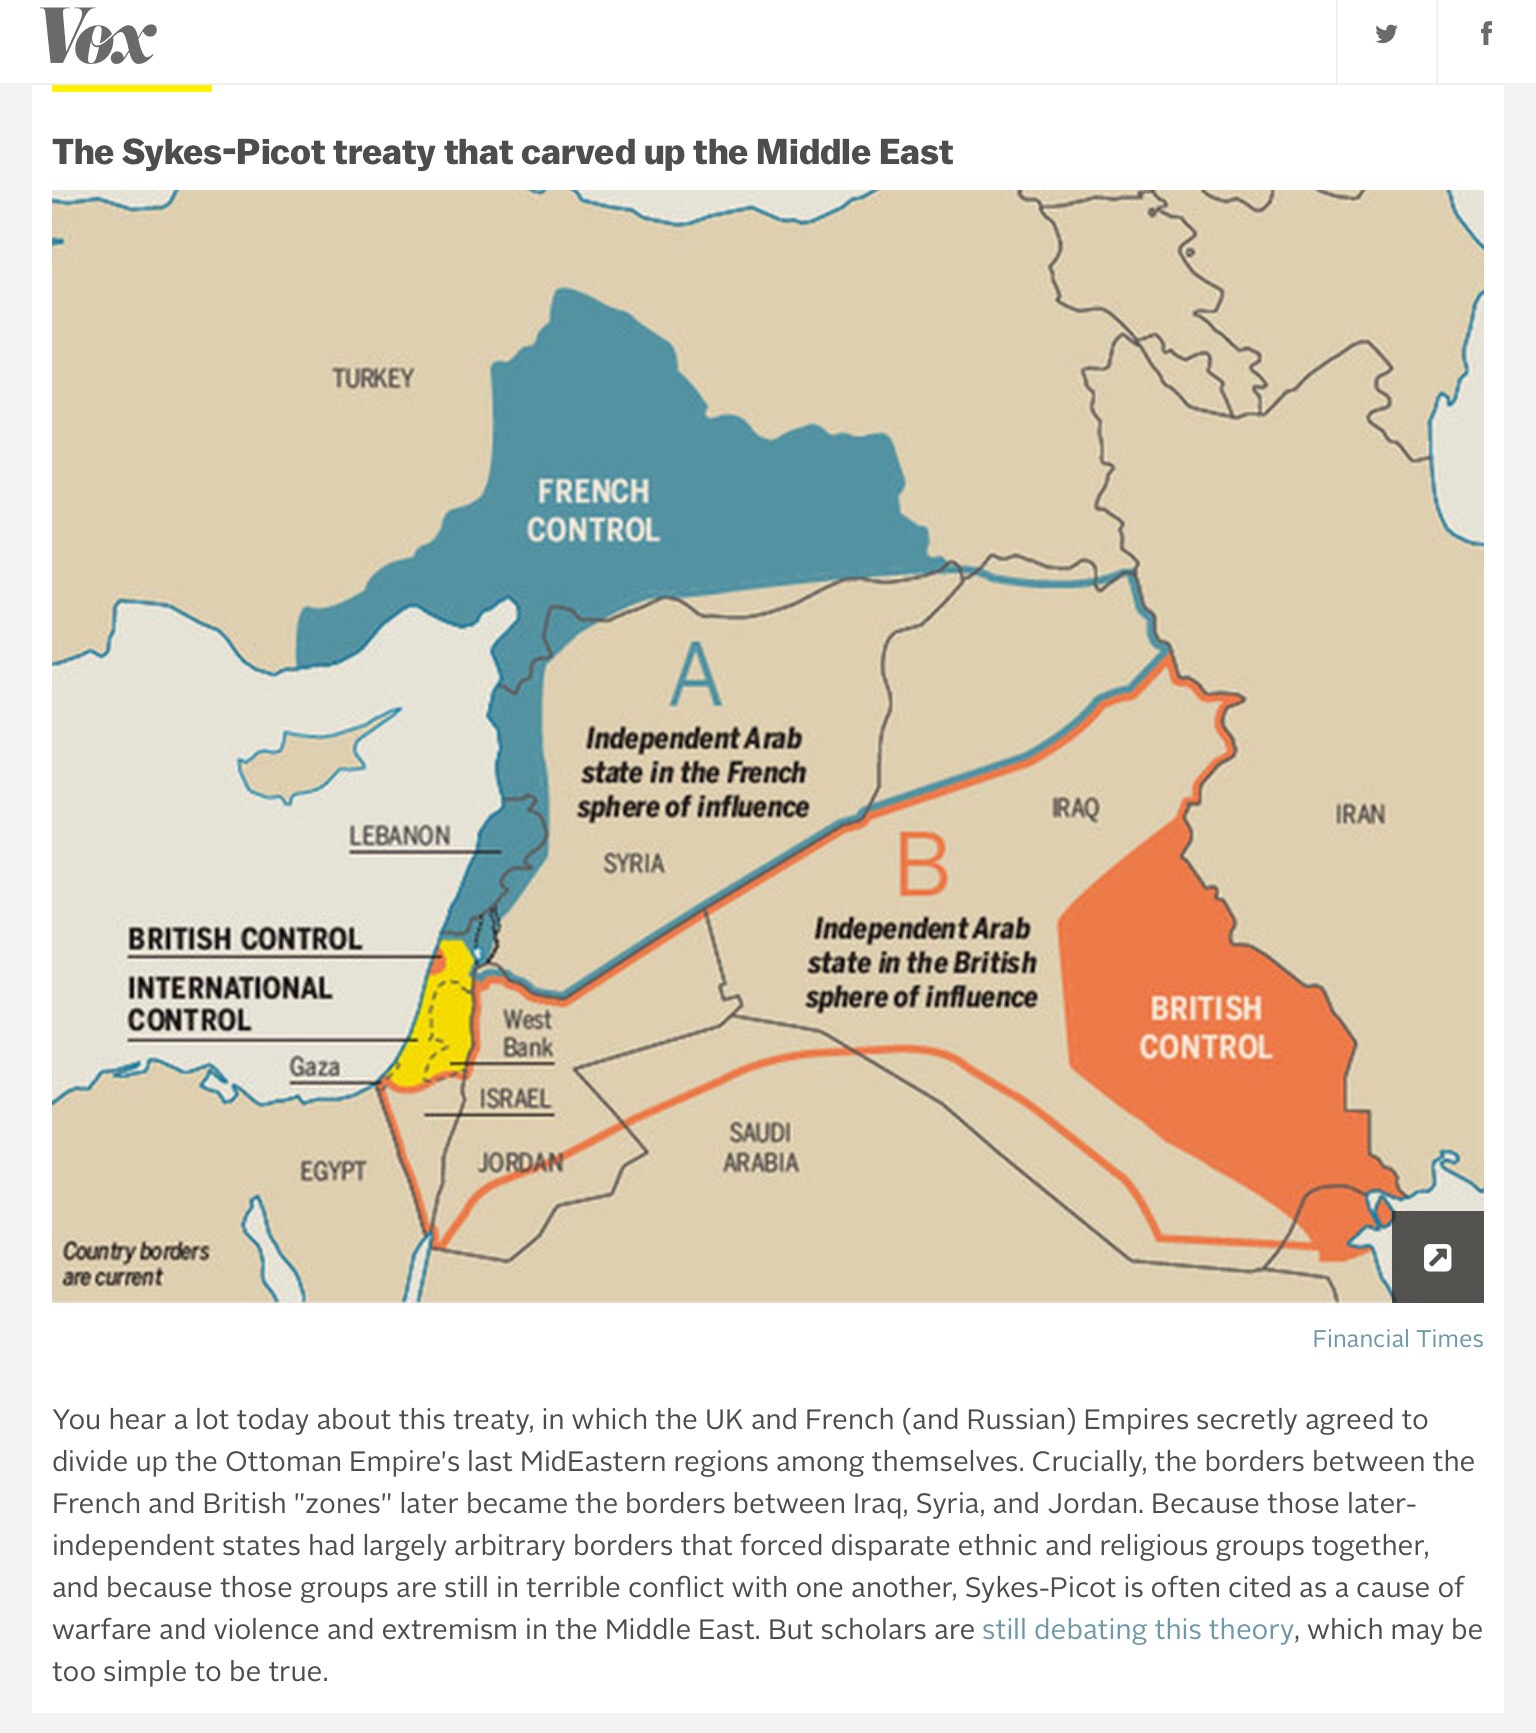 The Middle East after Sykes-Picot Treaty in 1916. Source: Vox. http://bit.ly/1mf5ymr